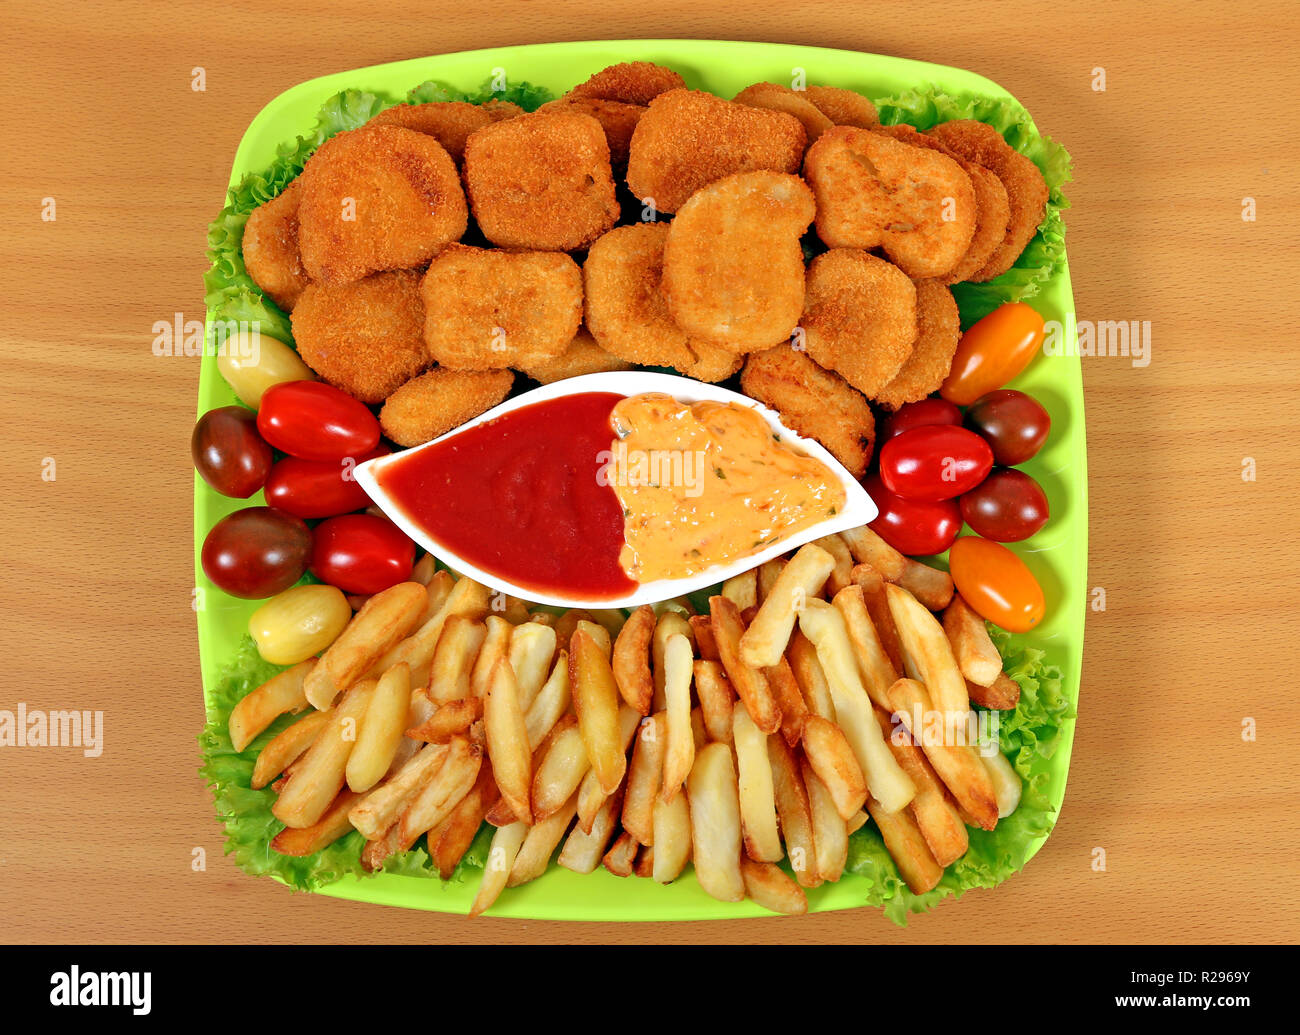 chicken nuggets and french fries fast food Stock Photo